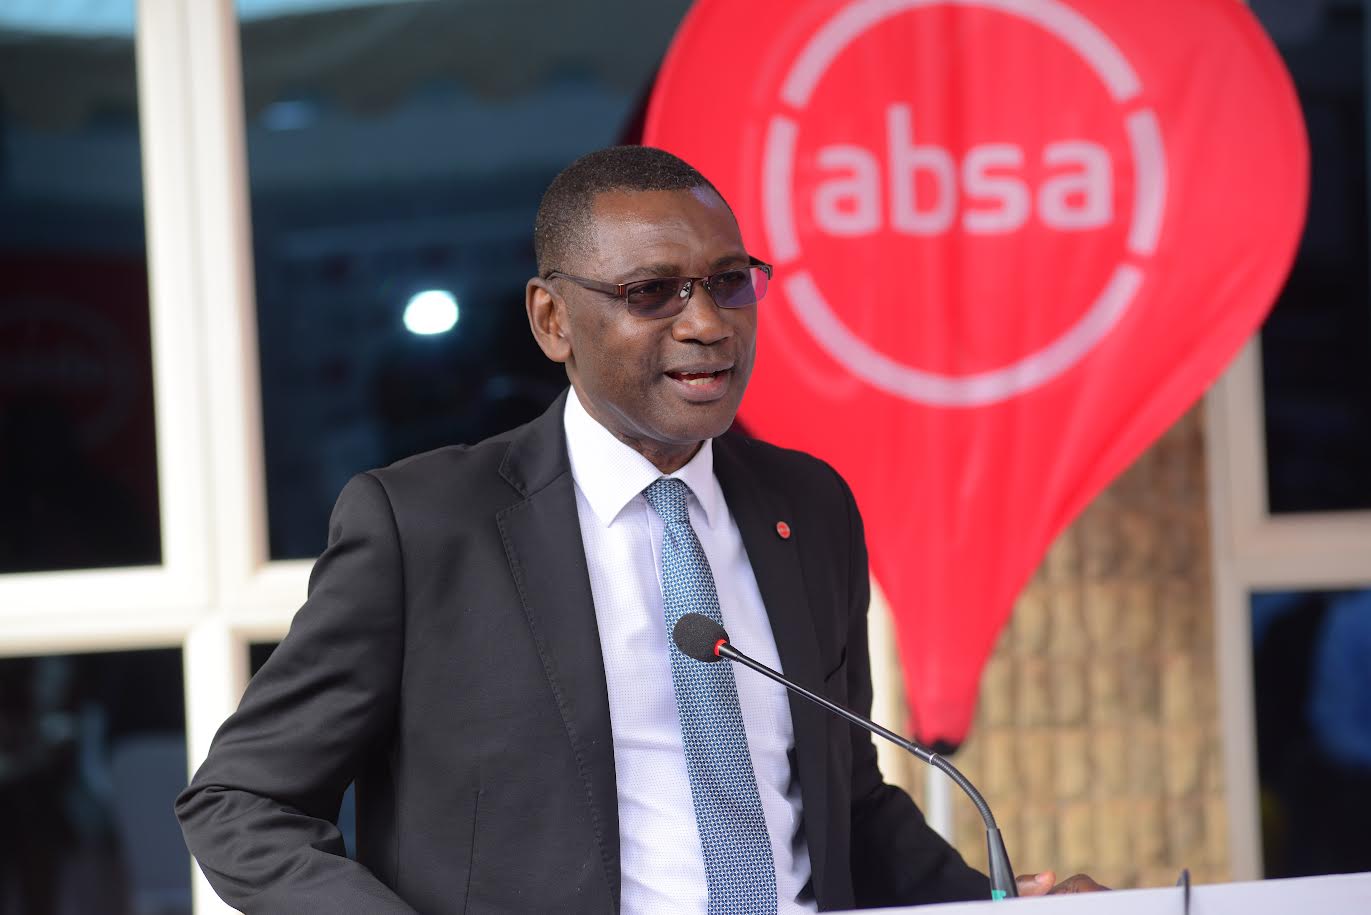 Absa eases access to convenient financing with credit cards